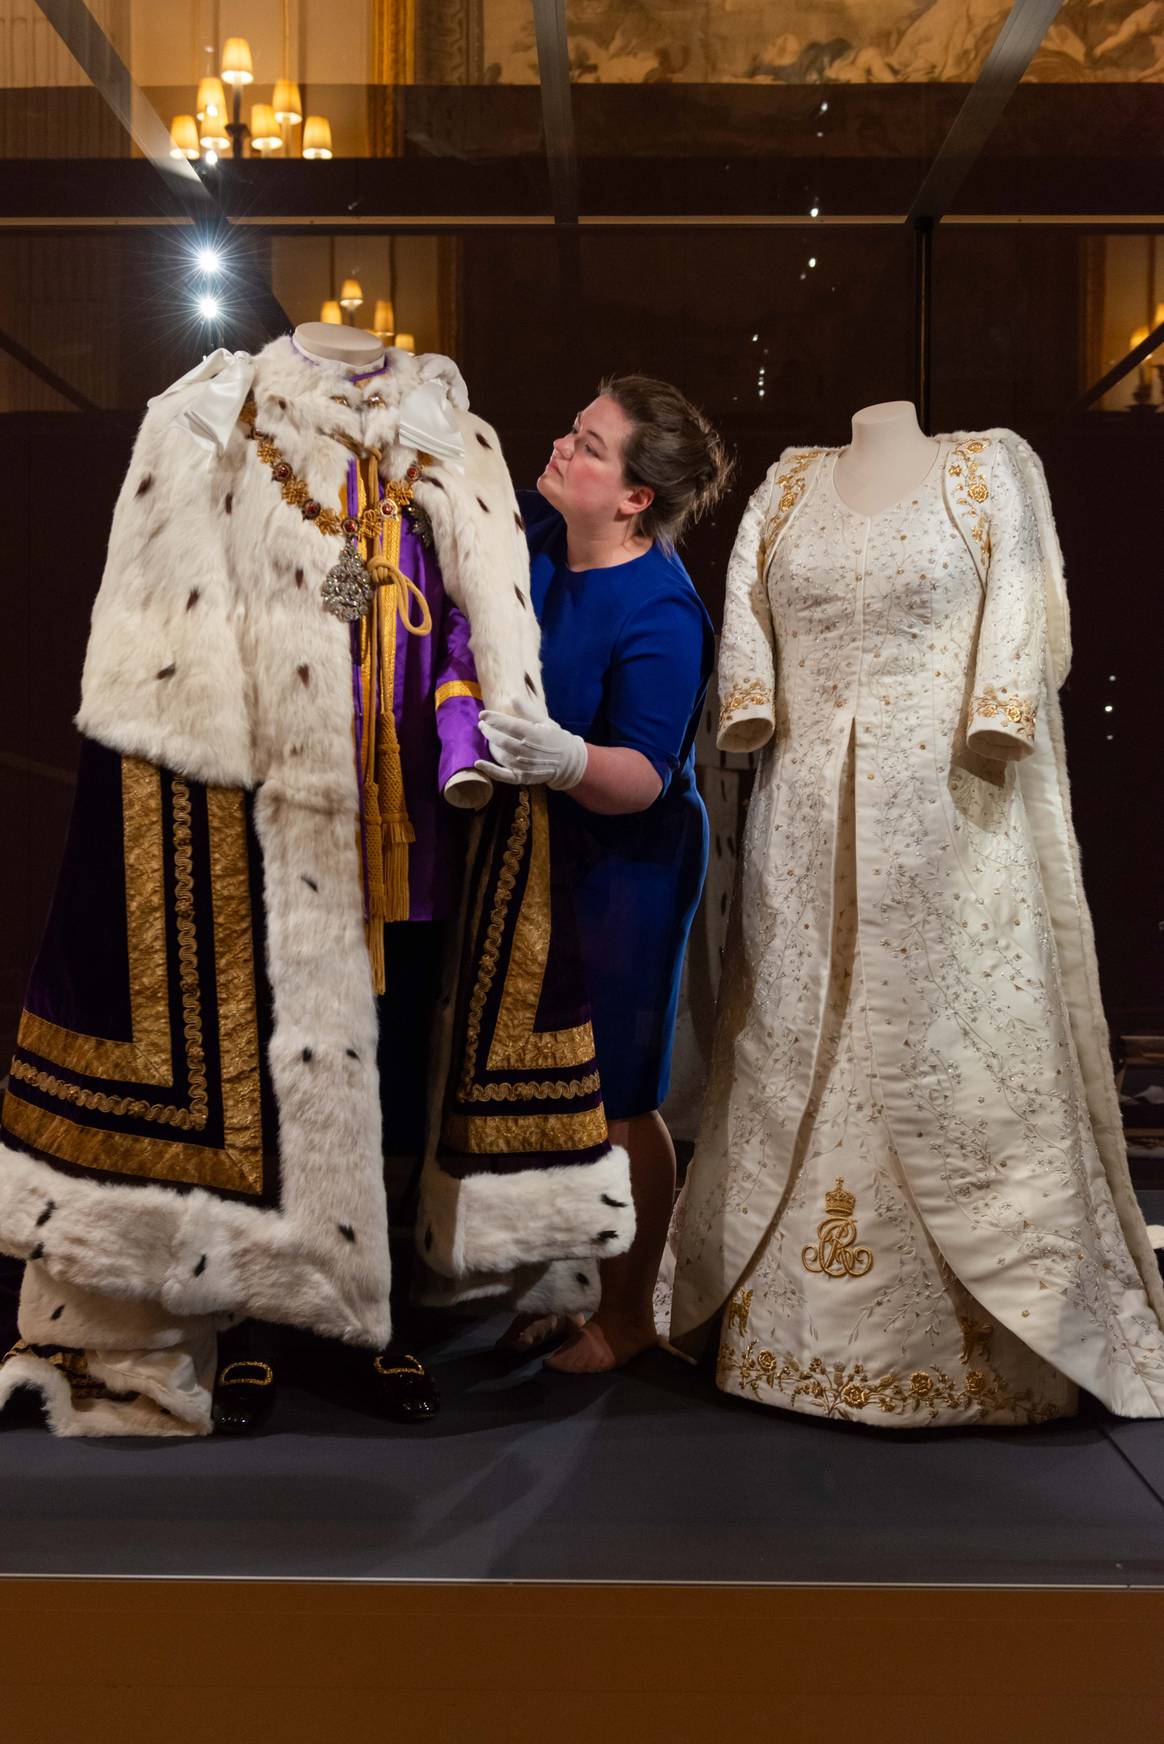 Curator Sally Goodsir makes final adjustments to  The King’s Robe of Estate shown next to  The Queen’s Coronation Dress